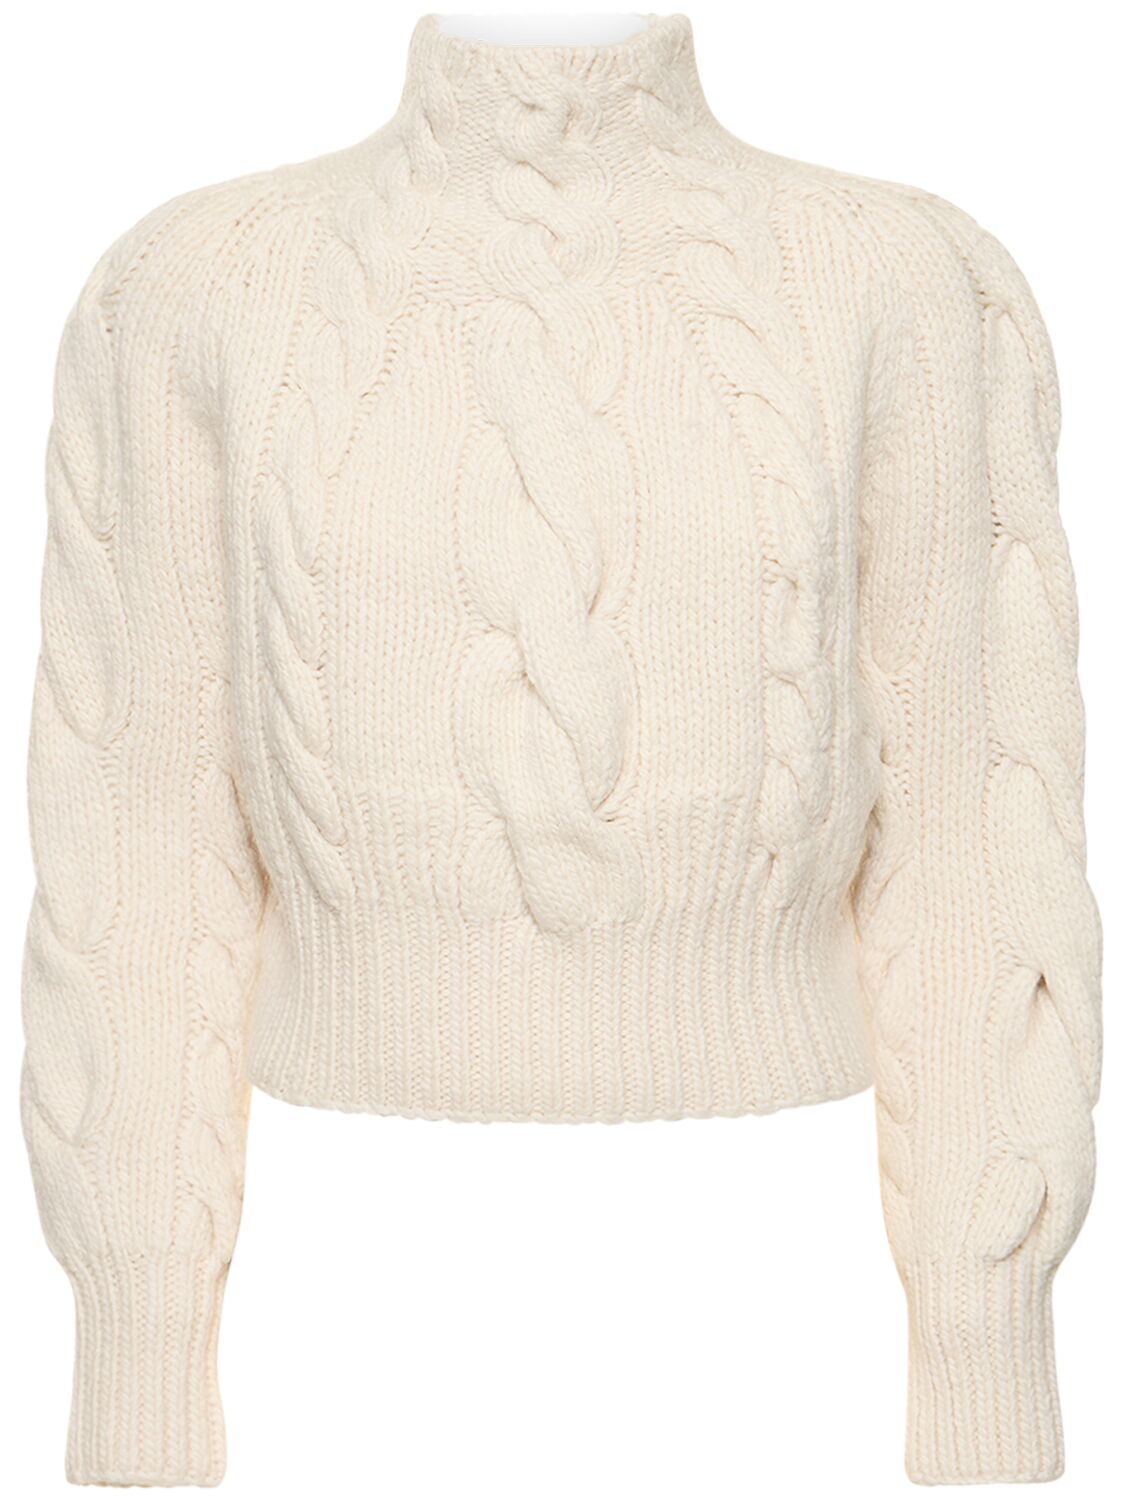 Luminosity Cable Knit Wool Sweater